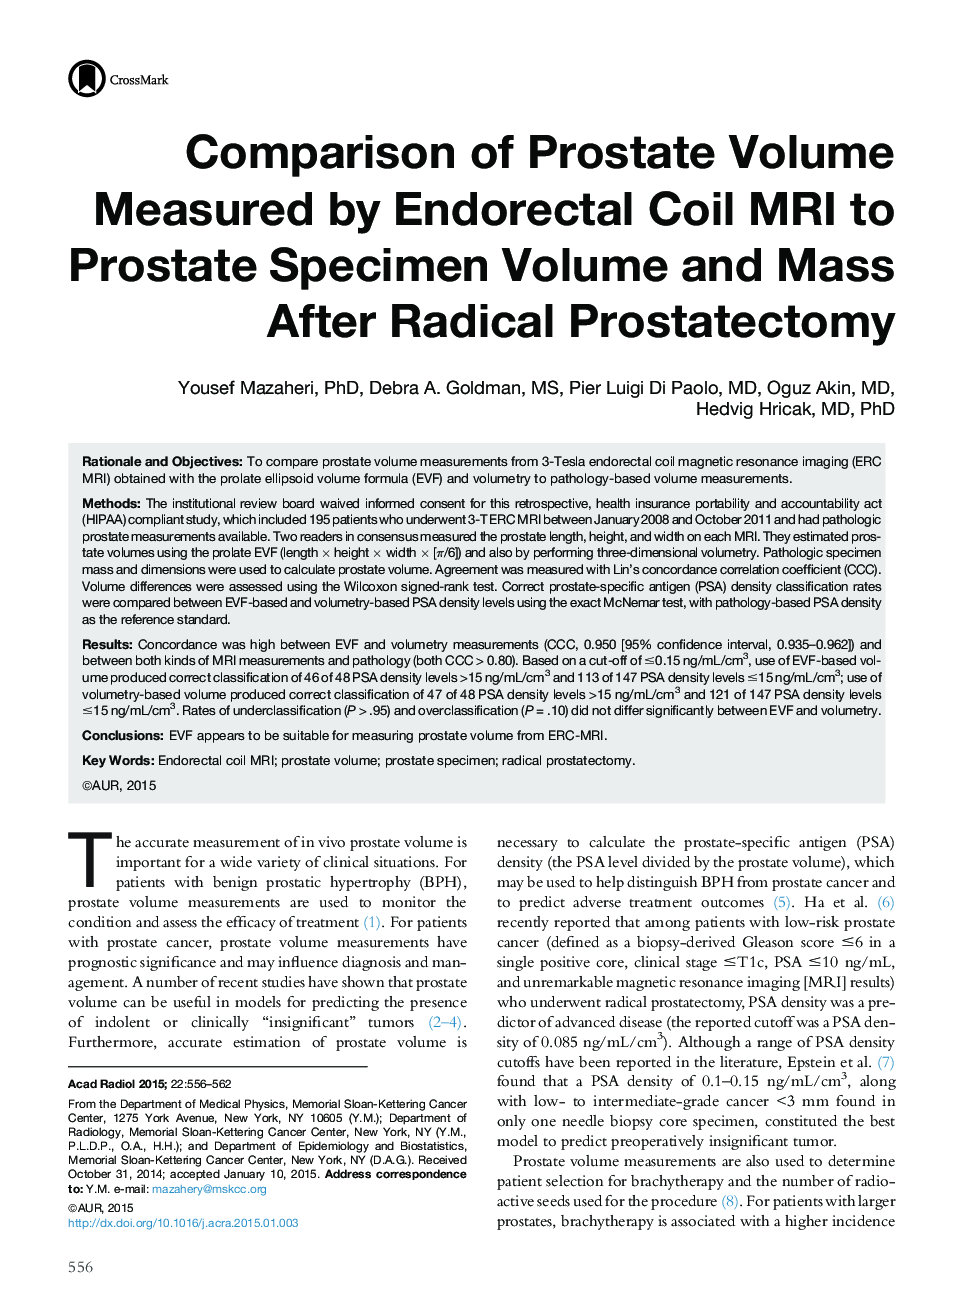 Comparison of Prostate Volume Measured by Endorectal Coil MRI to Prostate Specimen Volume and Mass After Radical Prostatectomy